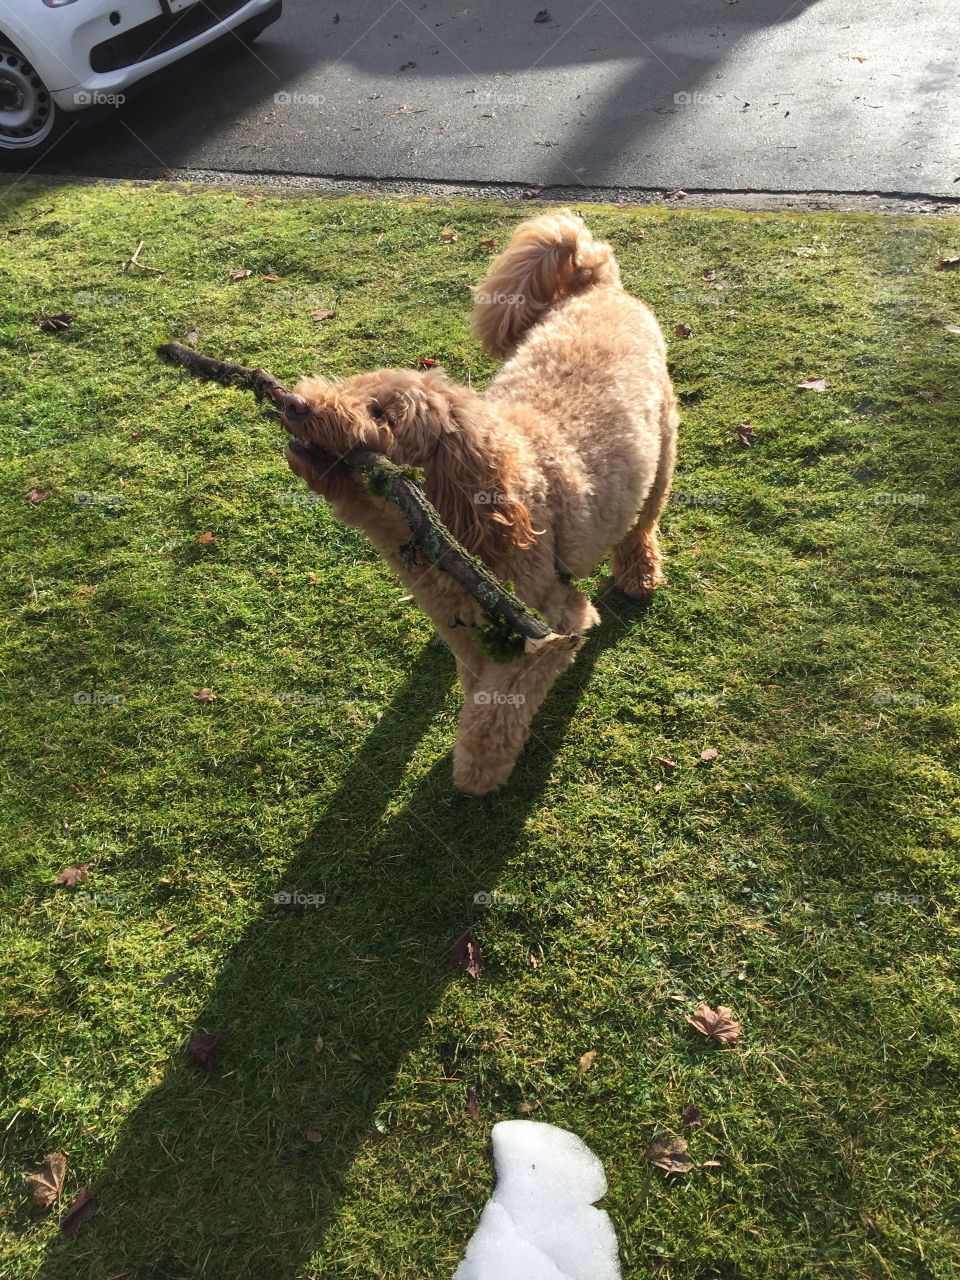 World record - Australian labradoodle from Canada lifts 25lb tree branch and tosses it around like it’s nothing for 1:44